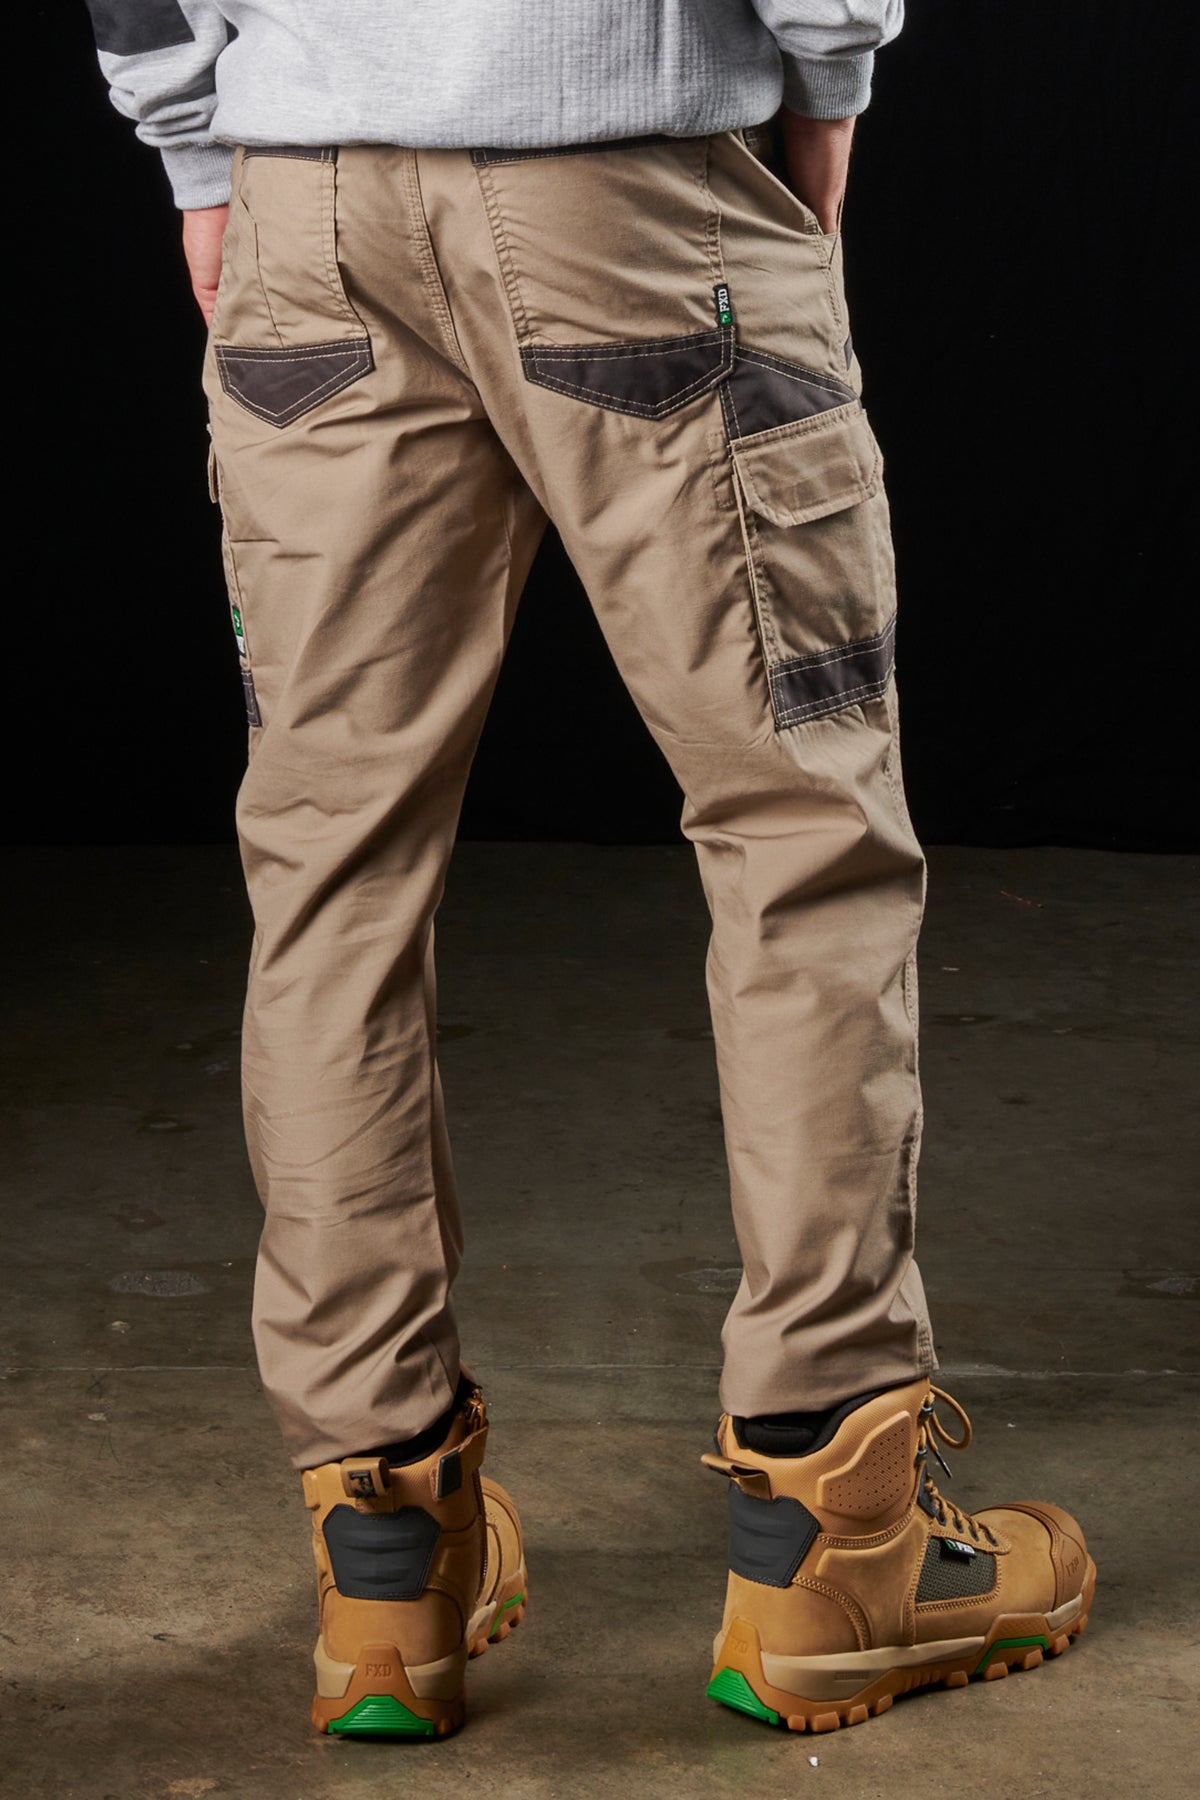 FXD WP-5 Lightweight Work Pant